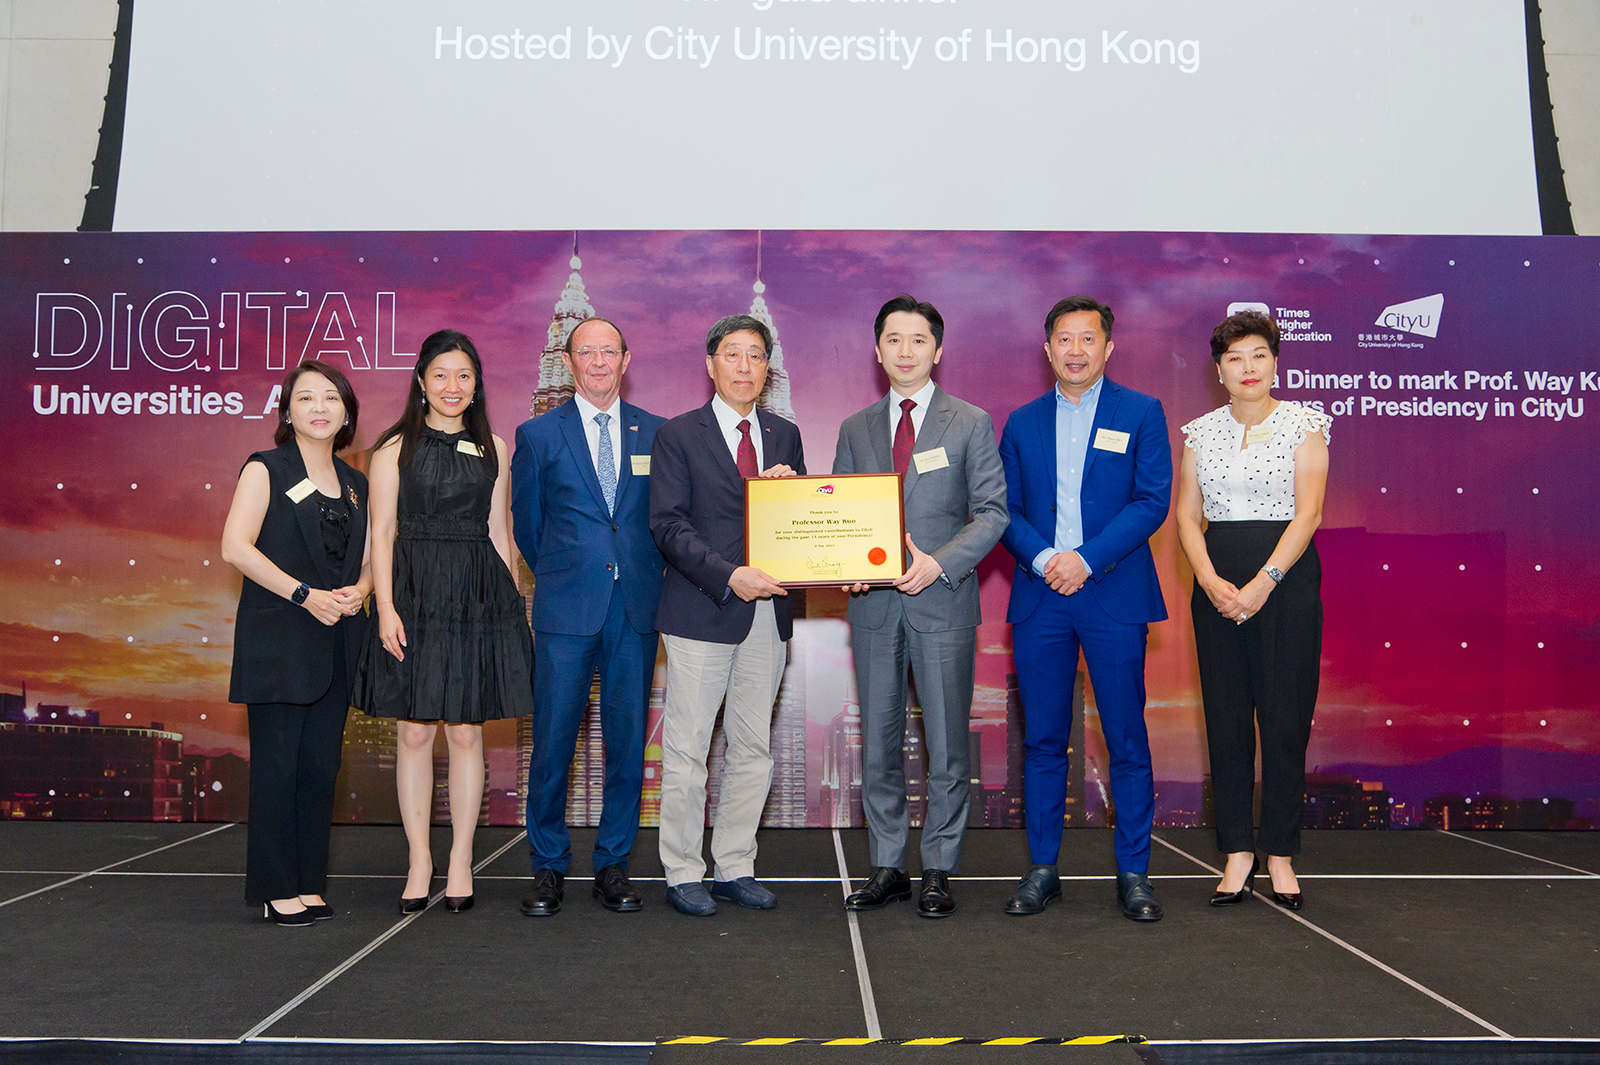 President Kuo with Council and Court members distinguished alumni: (from left to right) Ms Dilys Chau (Former Council and Court Member and Distinguished Alumna), Ms Rita Pang (Council Member), Dr Kevin Downing (Secretary to Council, who presided over the Gala dinner), President Way Kuo, Mr Rex Wong (Council Member), Mr Simon Hui (Court Member and Distinguished Alumnus) and Ms Jenny Chan (Court Member)